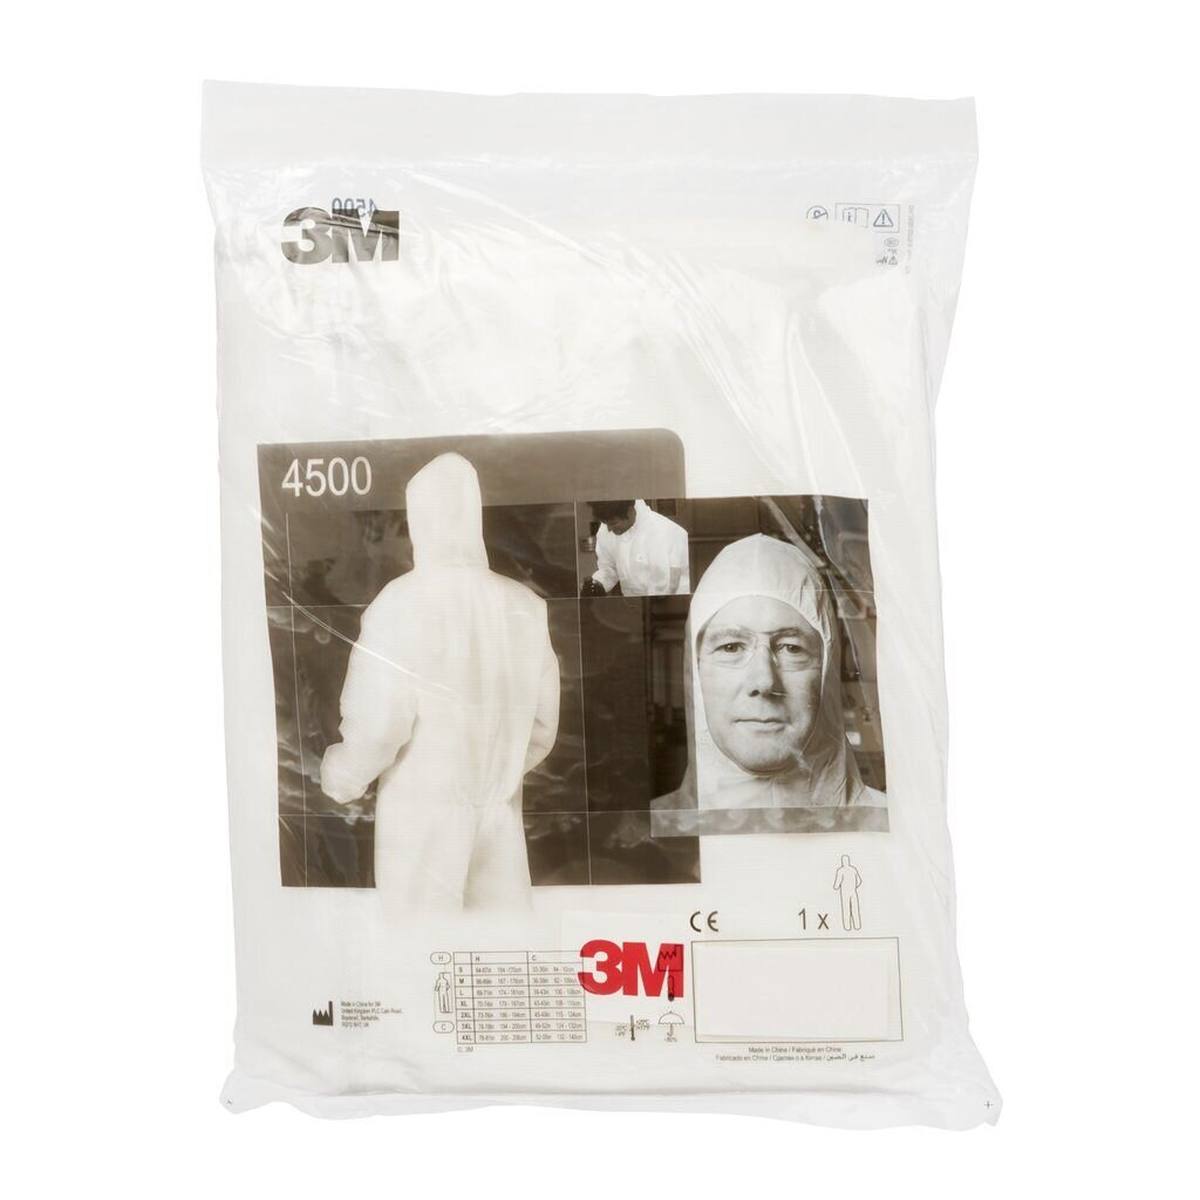 3M 4500 W Protective suit, white, CE, size 4XL, material polypropylene, elasticated cuffs